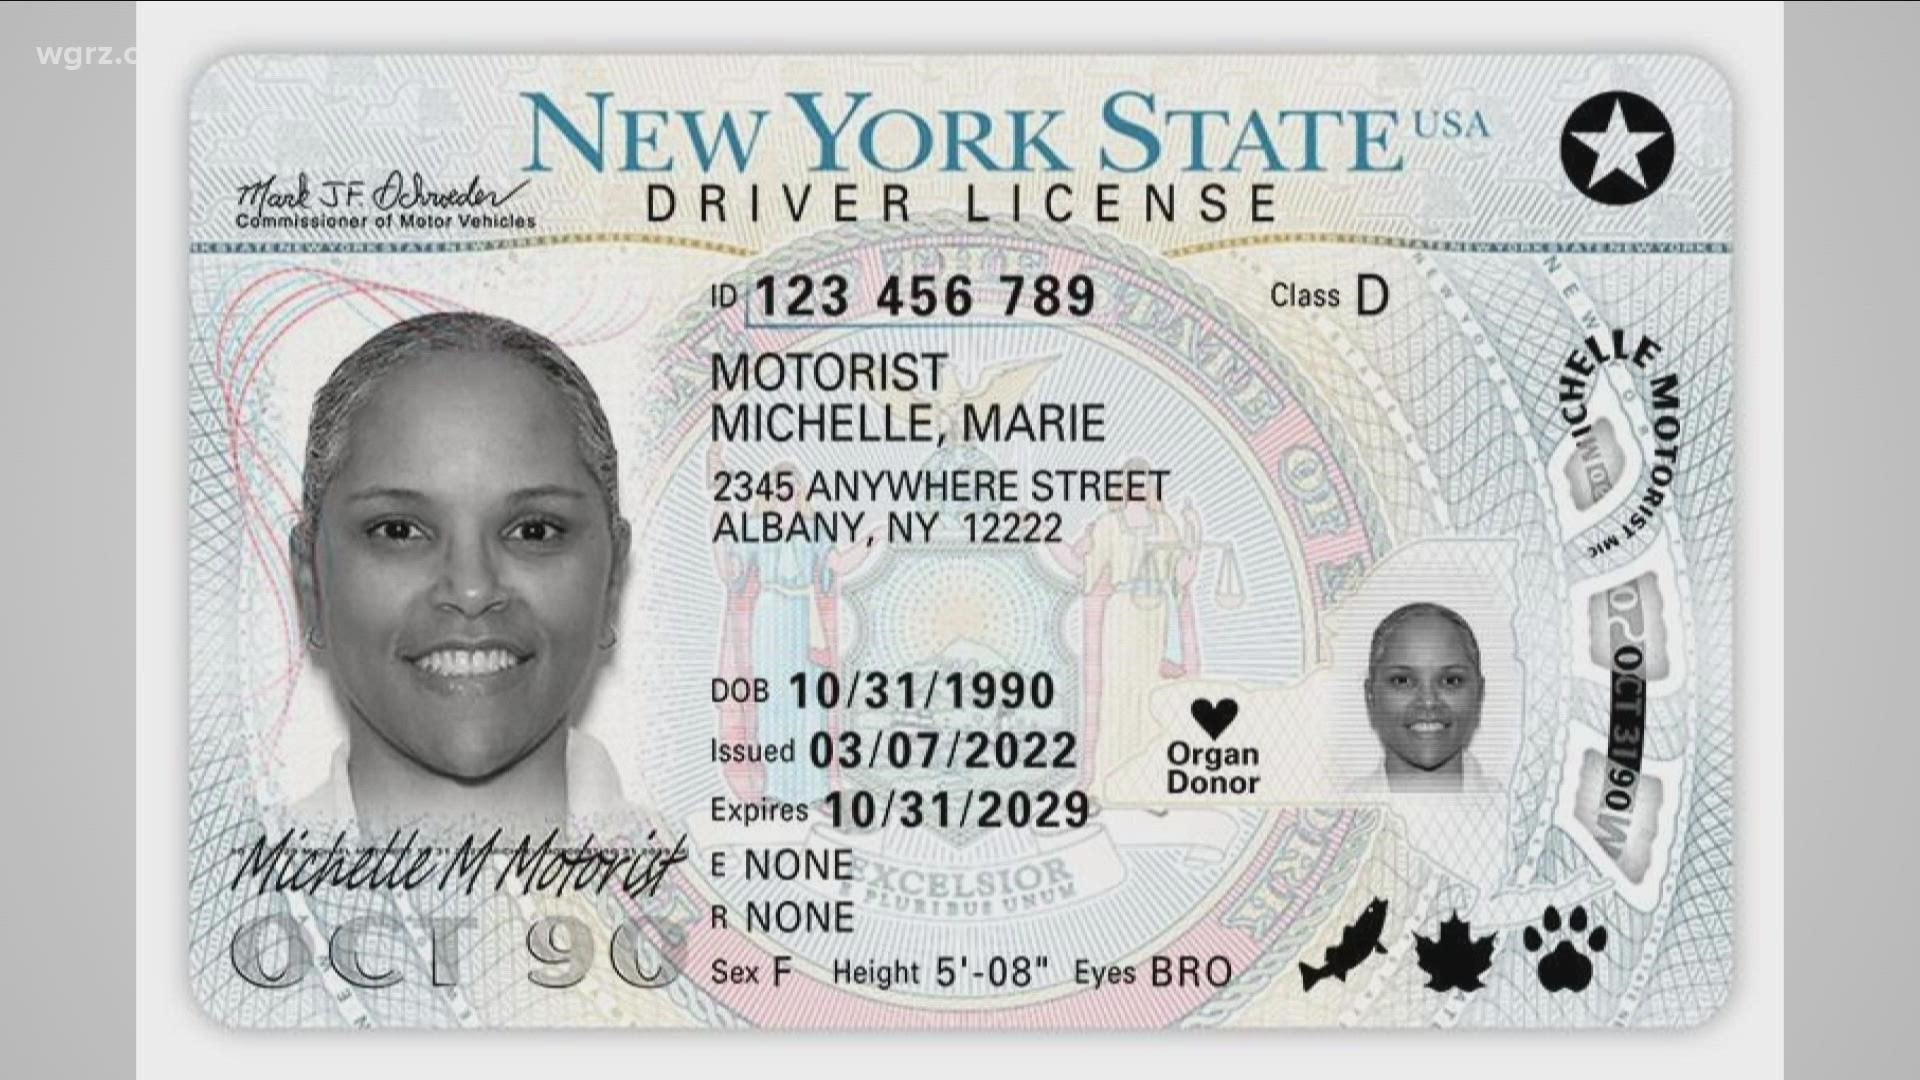 NYS announces redesign for driver's license